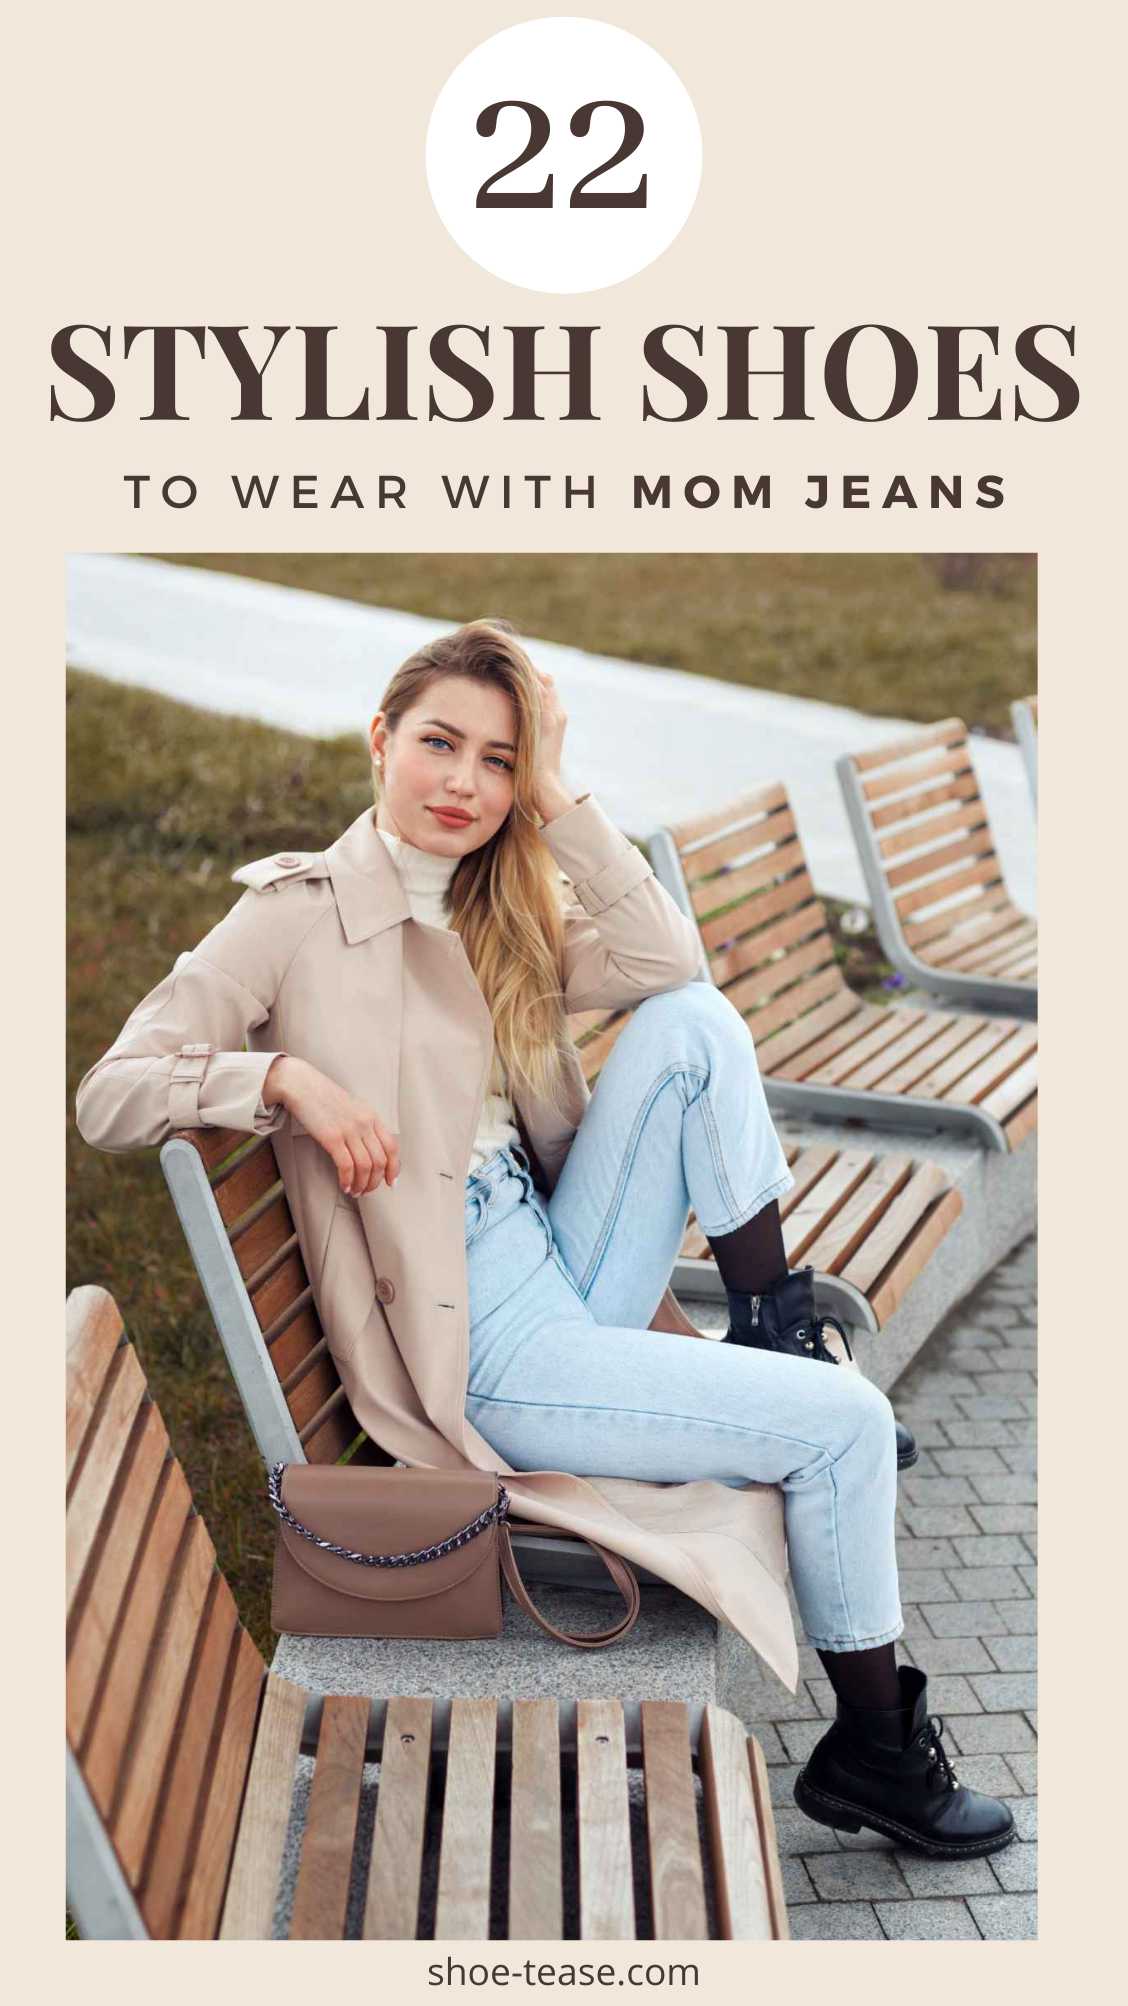 How to Wear Mom Jeans With Boots? 